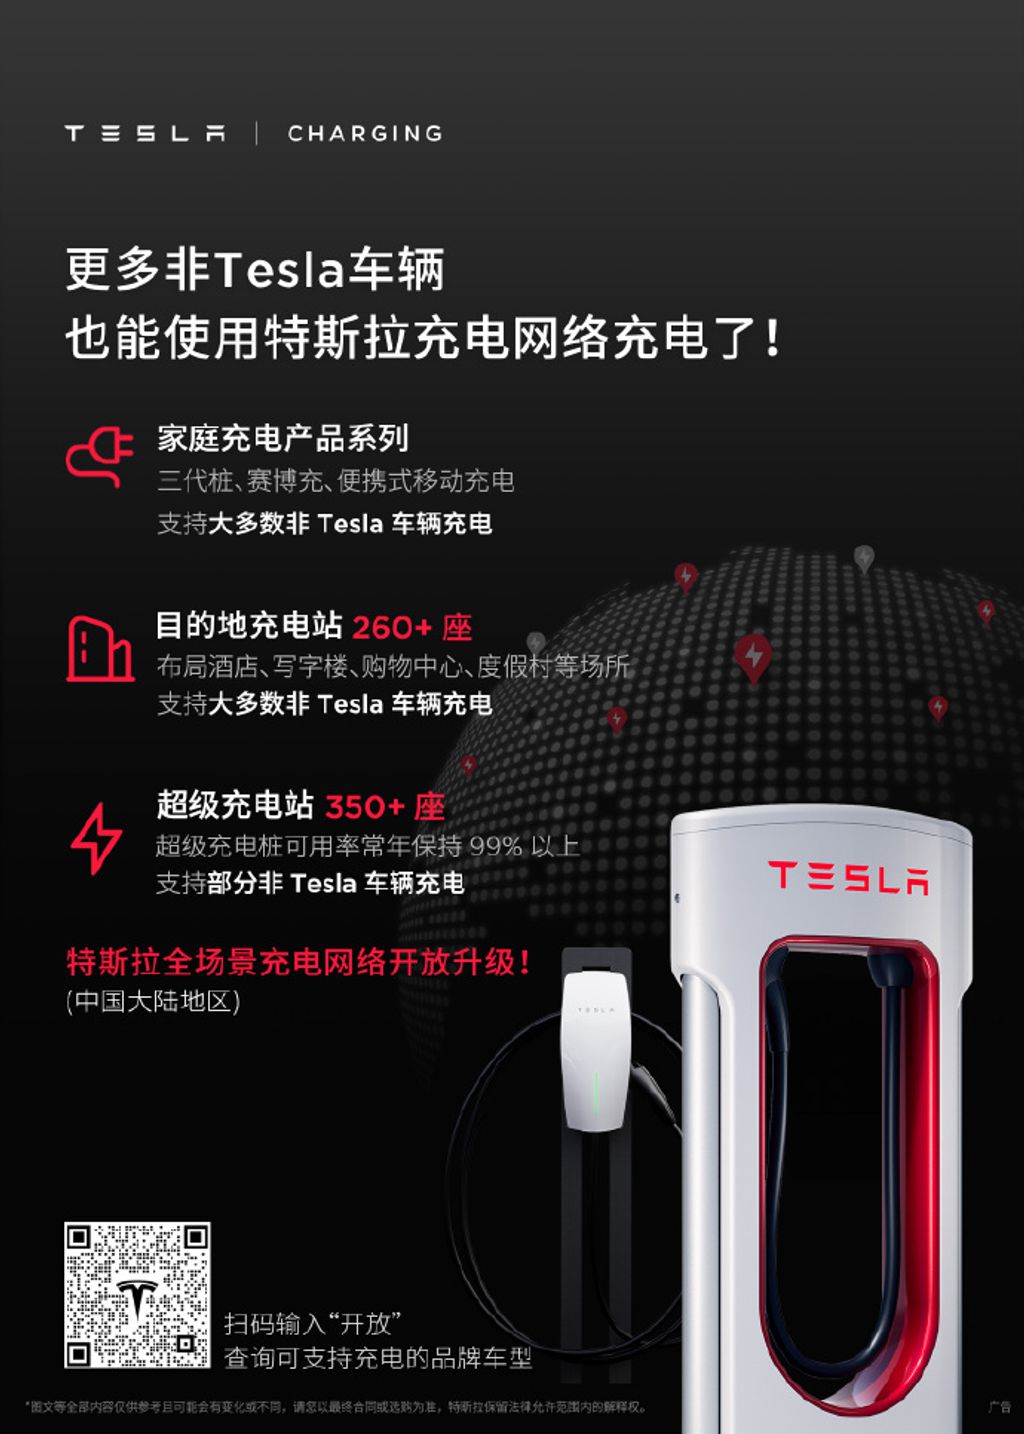 non-tesla ev supercharging goes full-scale in china